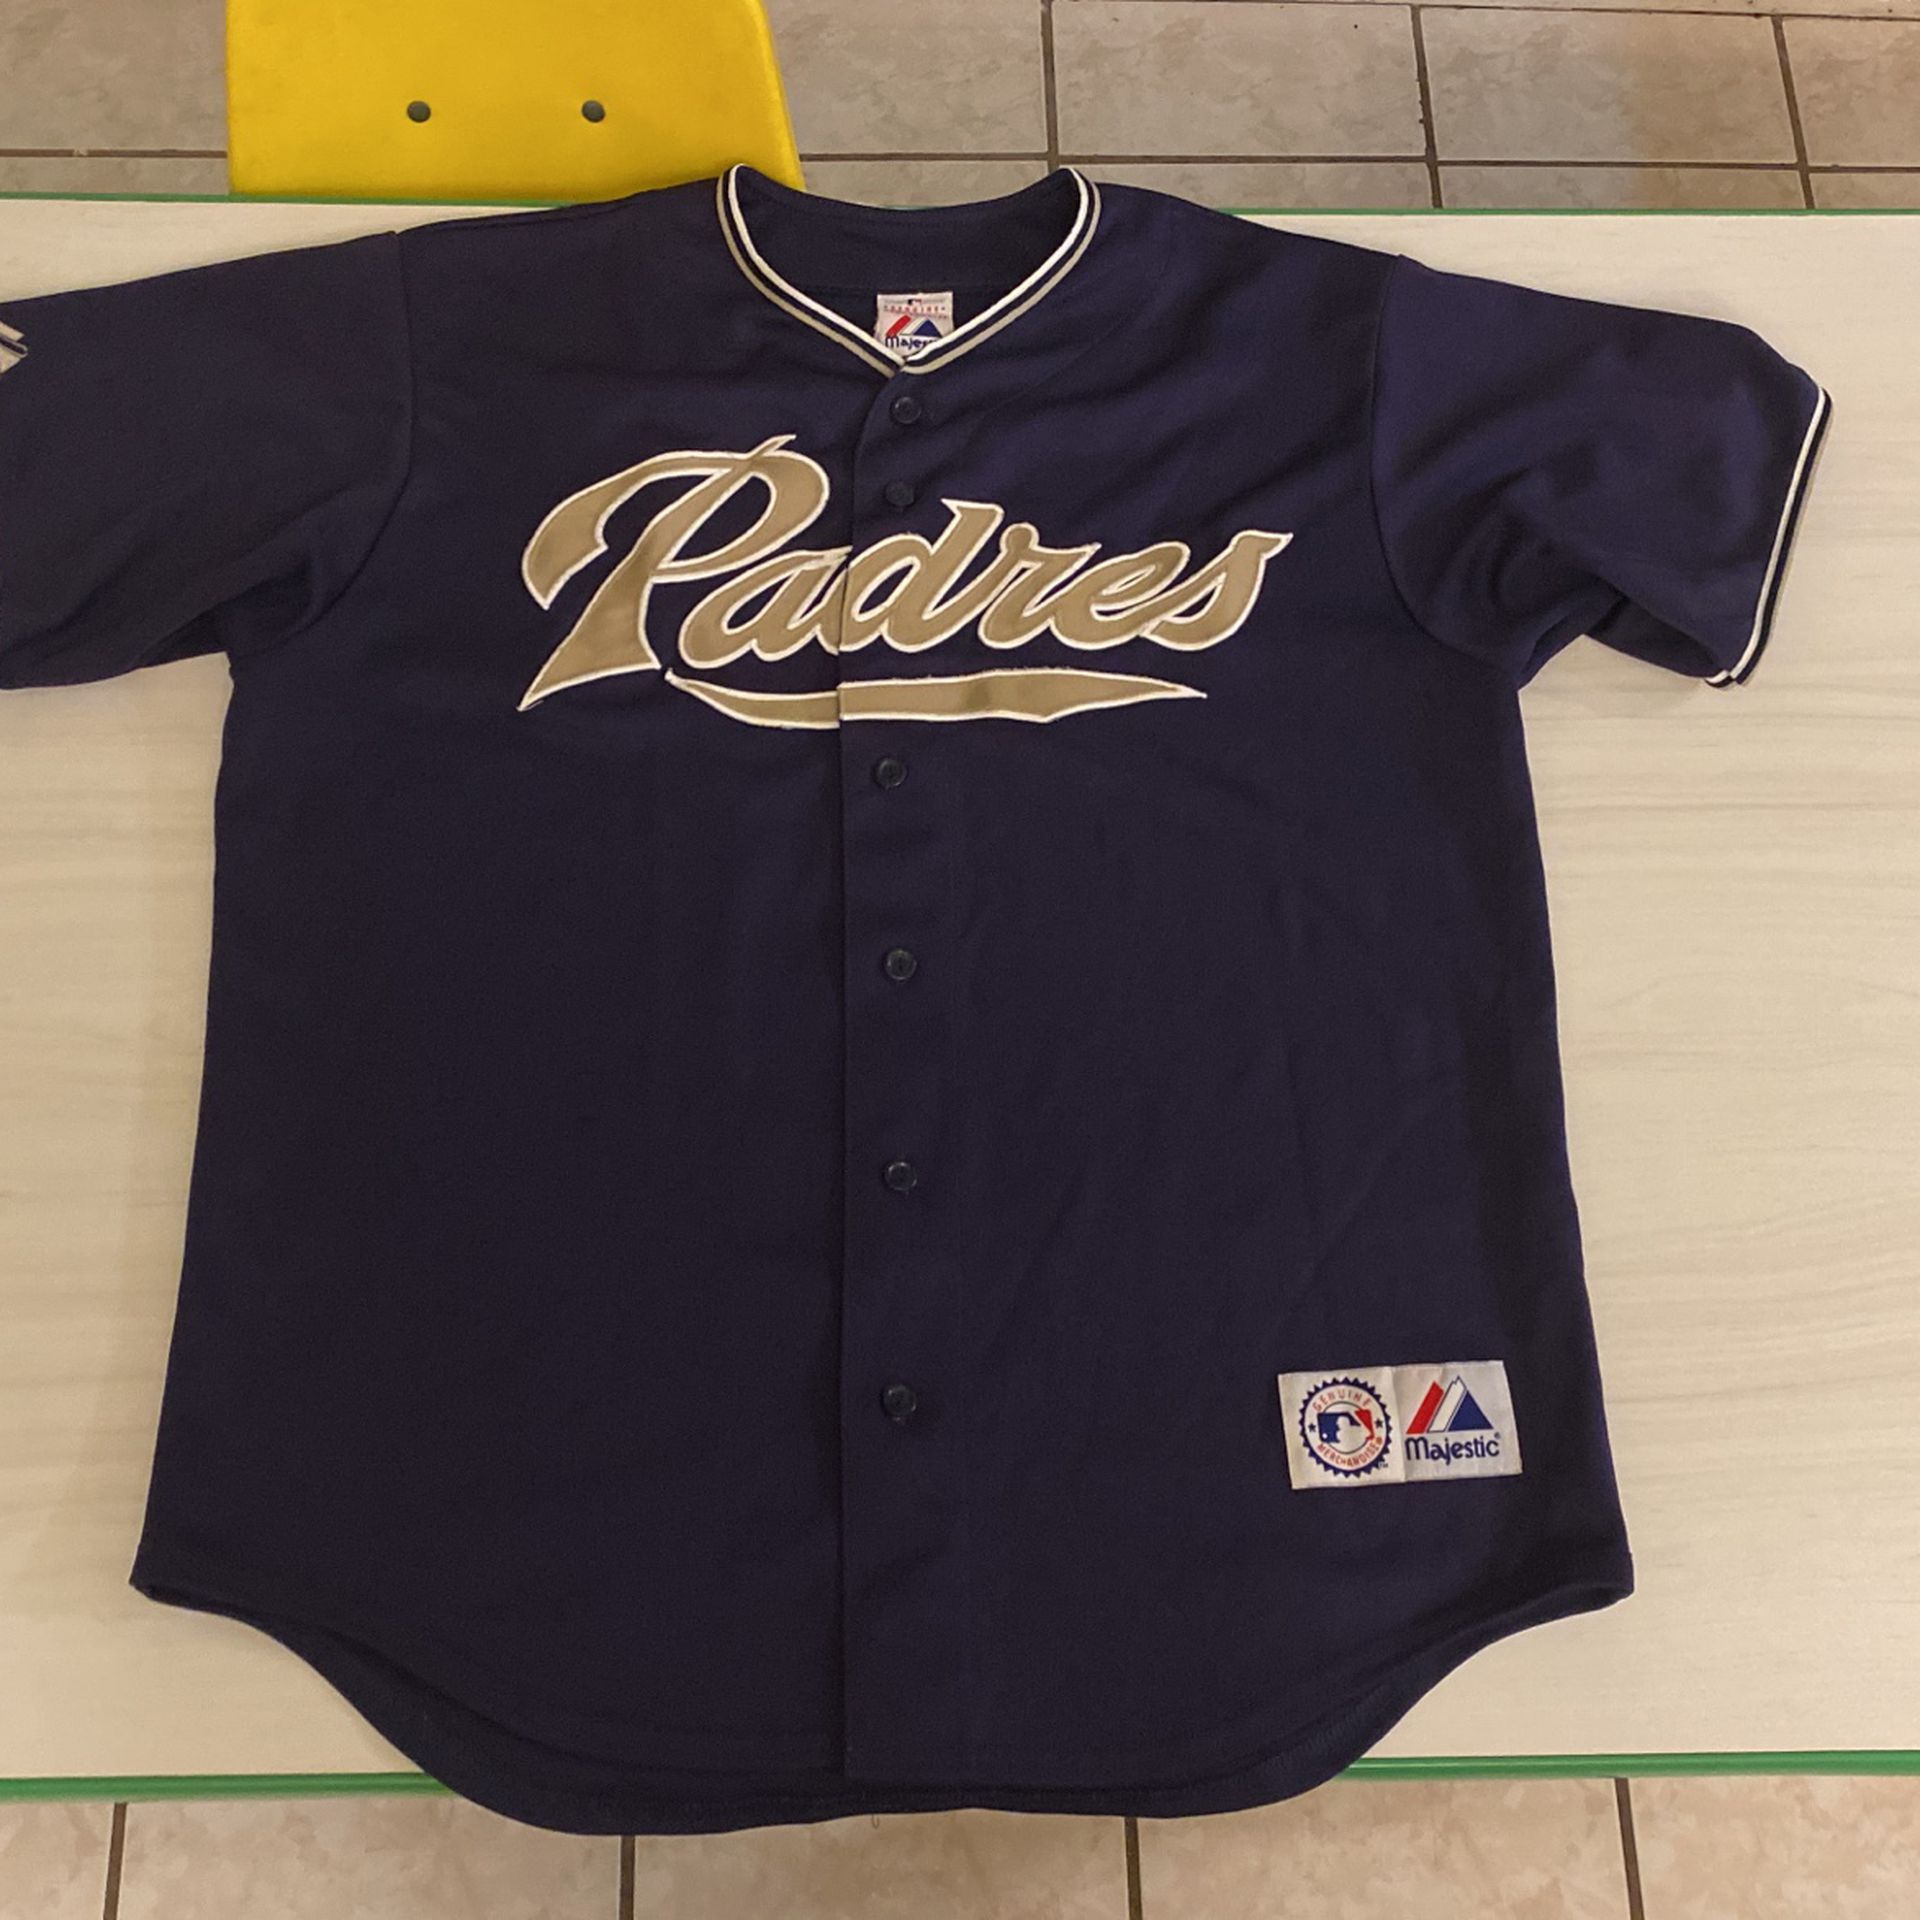 padre jersey for sale